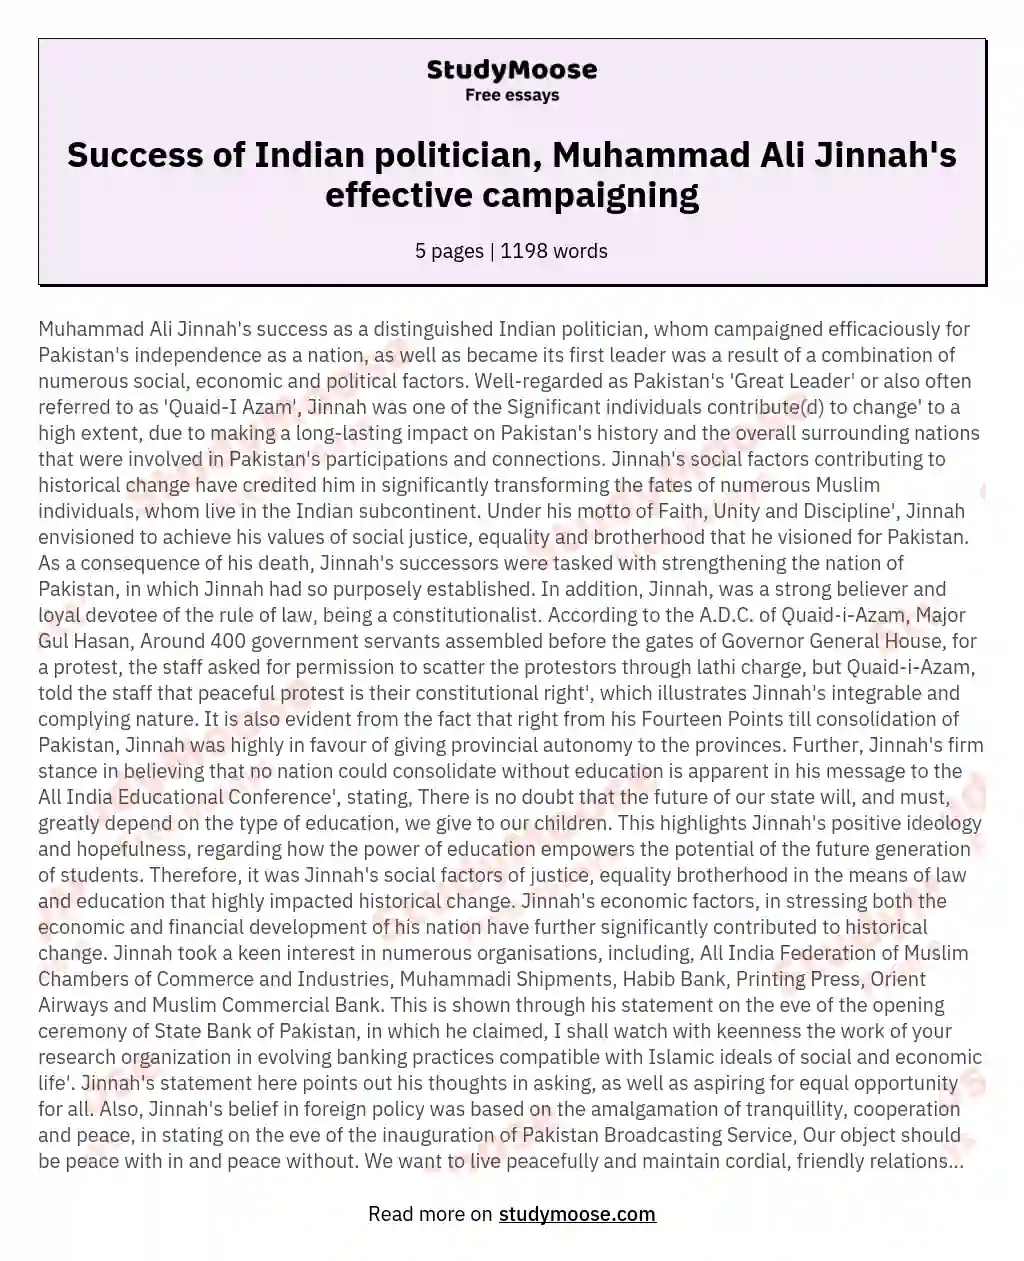 Muhammad Ali Jinnah's success as a distinguished Indian politician whom campaigned efficaciously